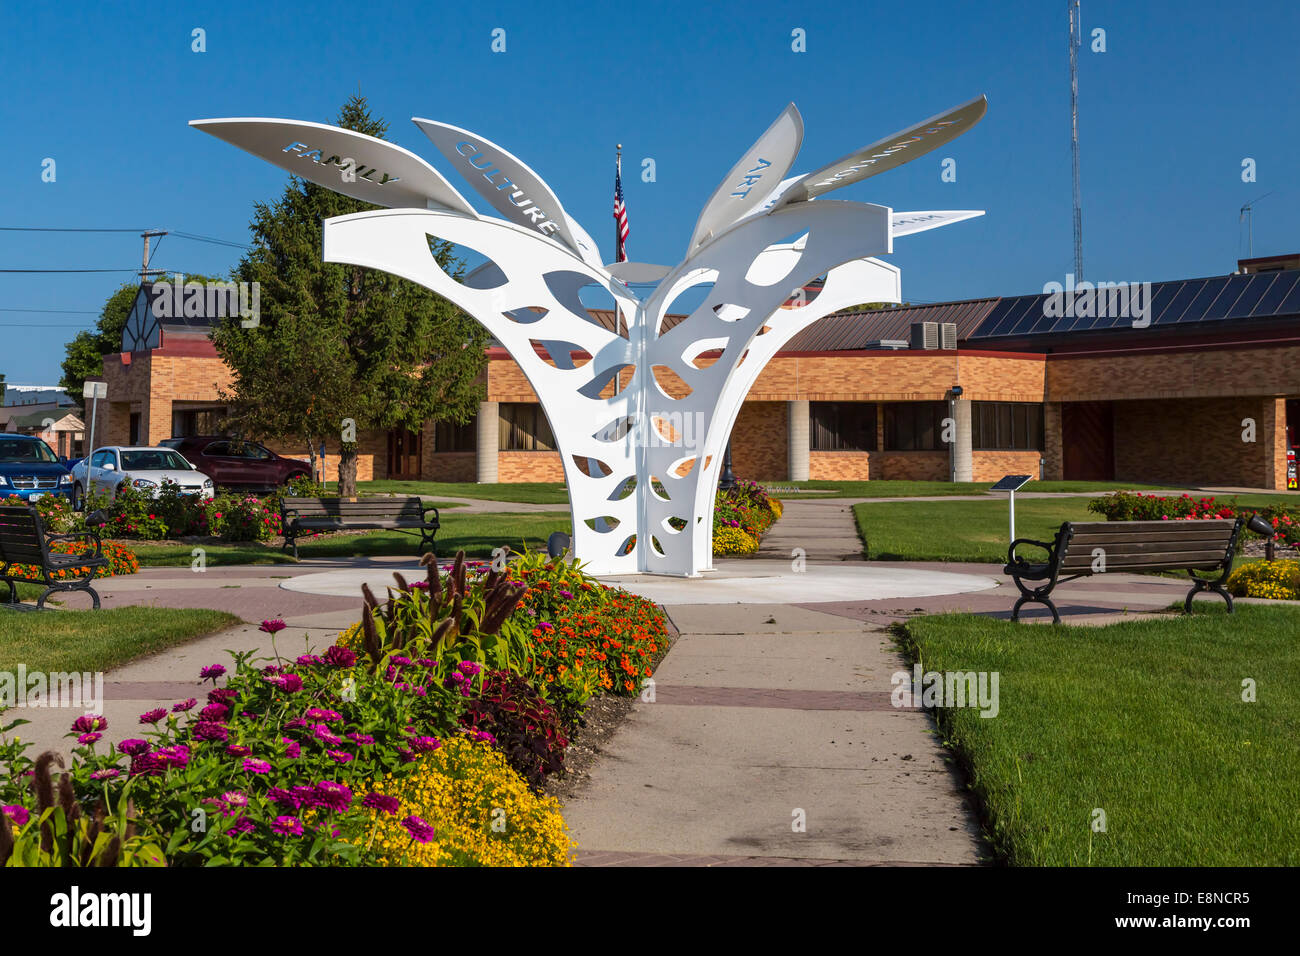 The city Hall and gardens with metal sculpture in Indianola, Iowa. Stock Photo